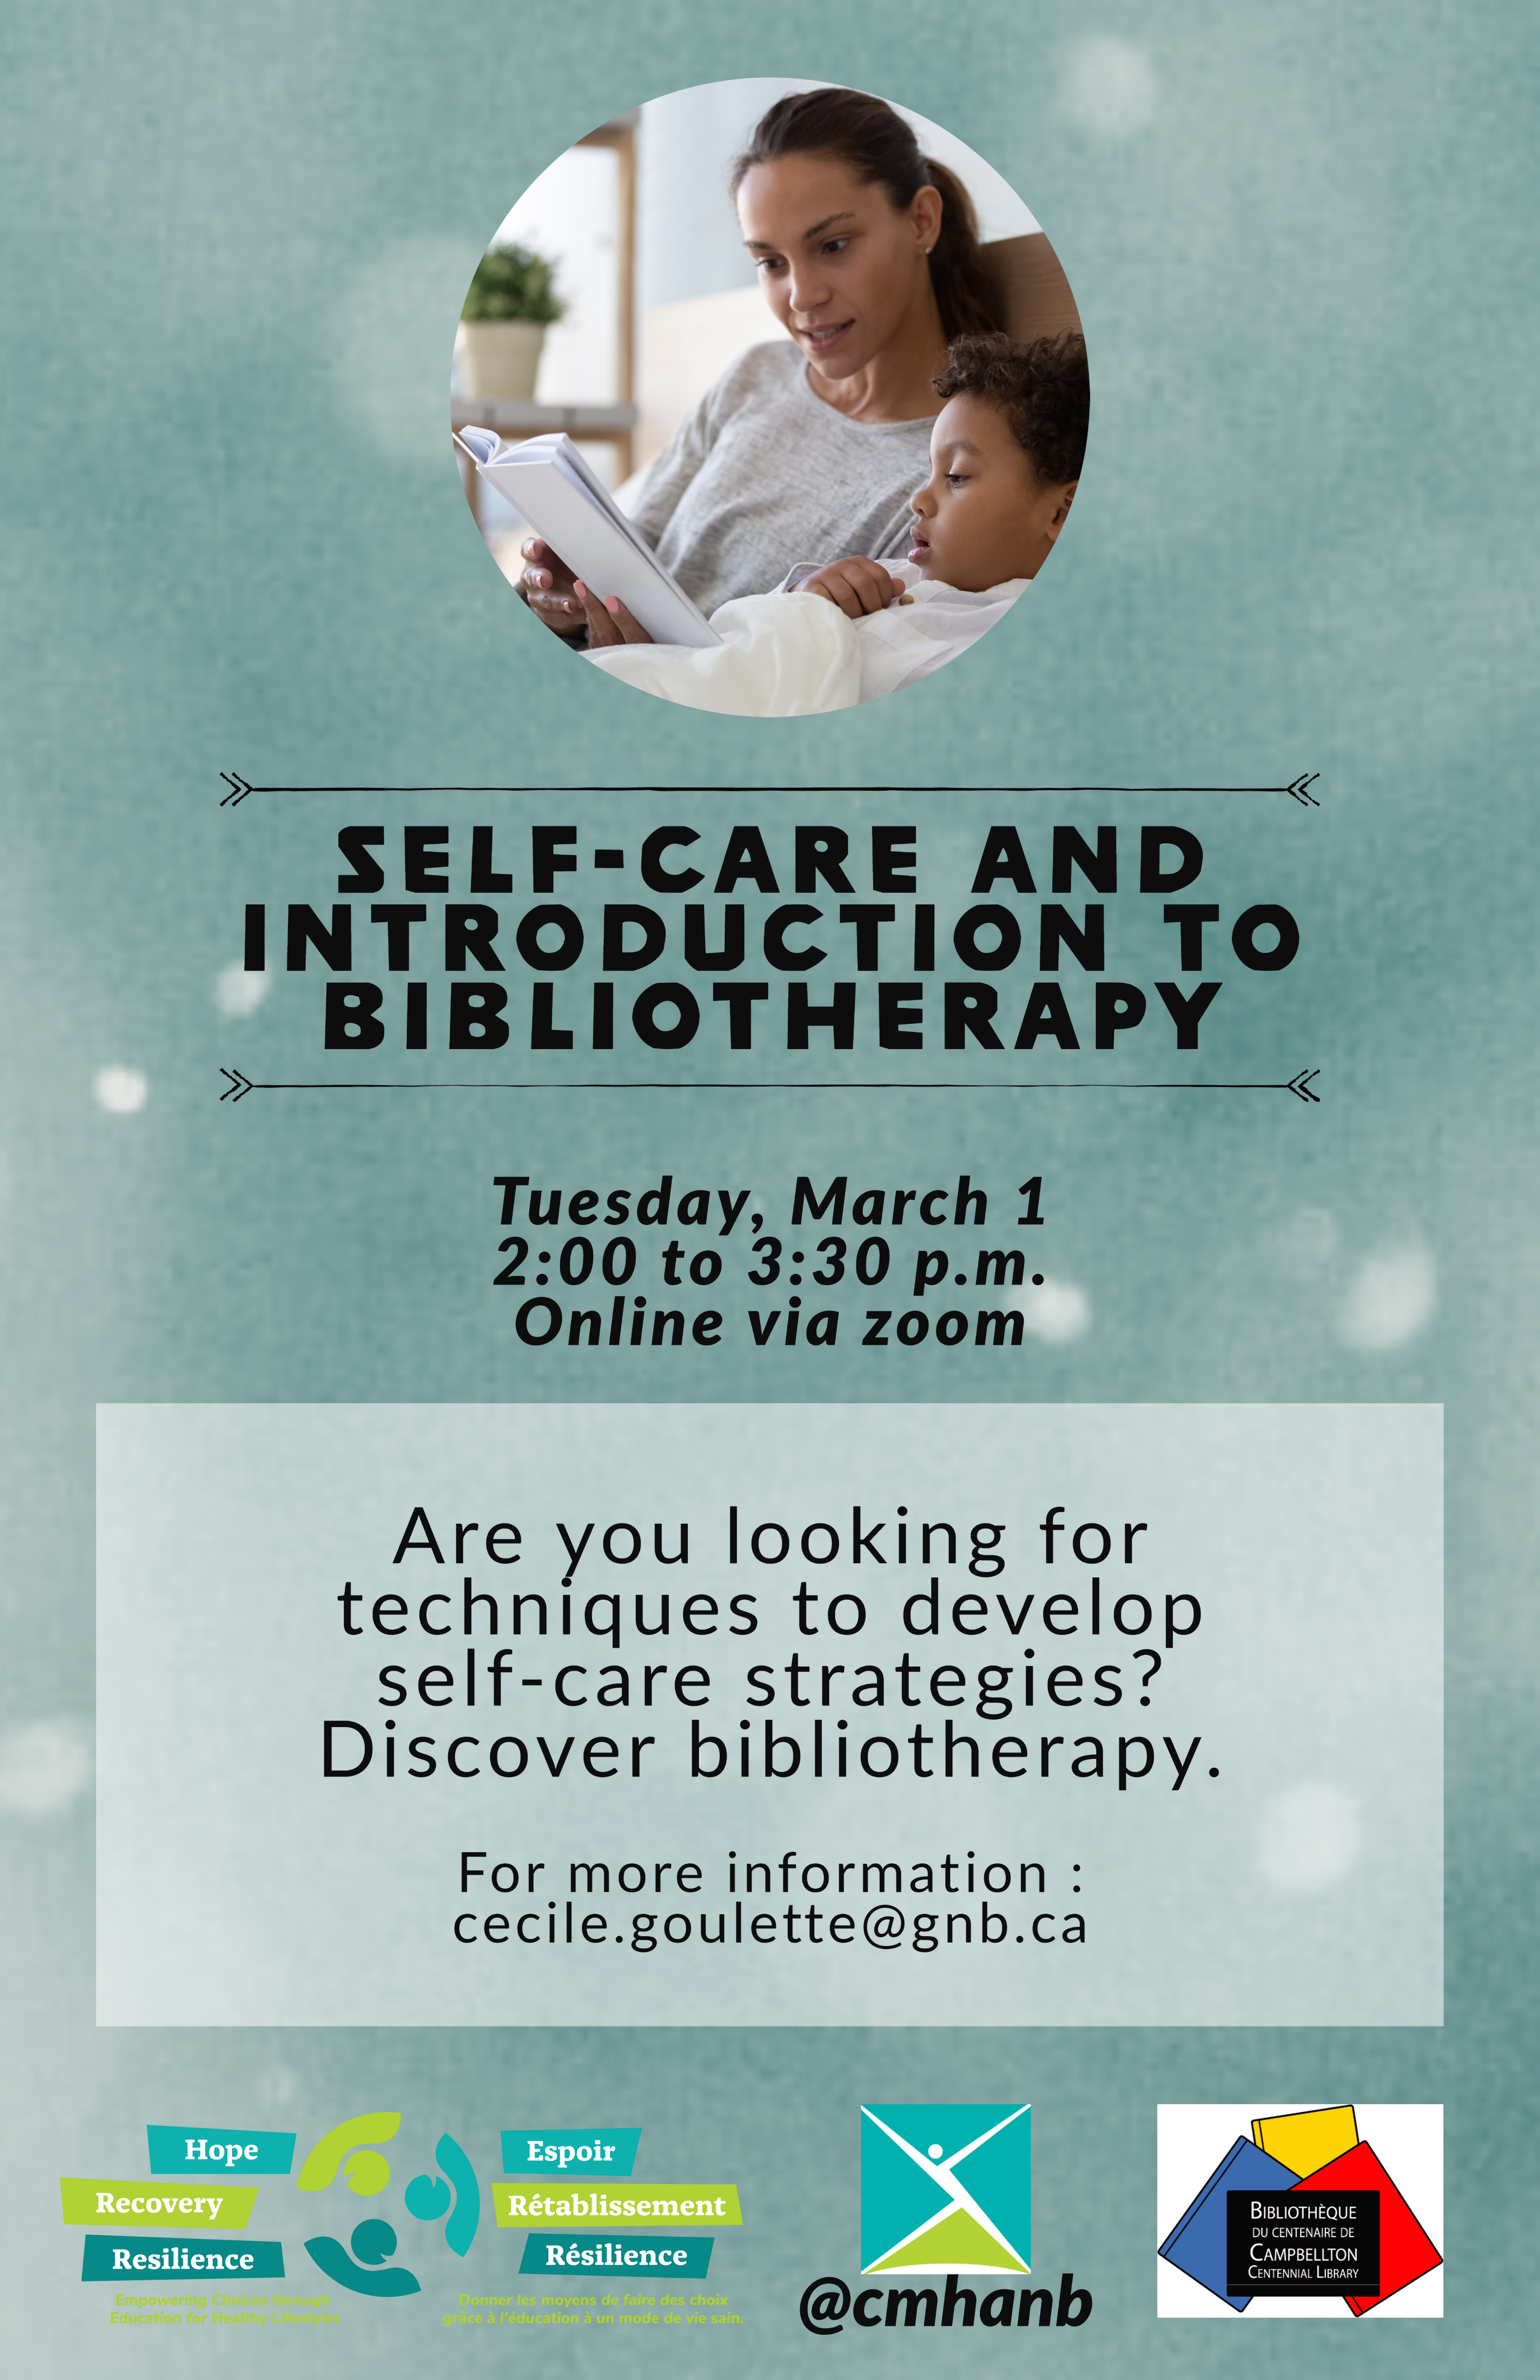 Self-Care and Bibliotherapy